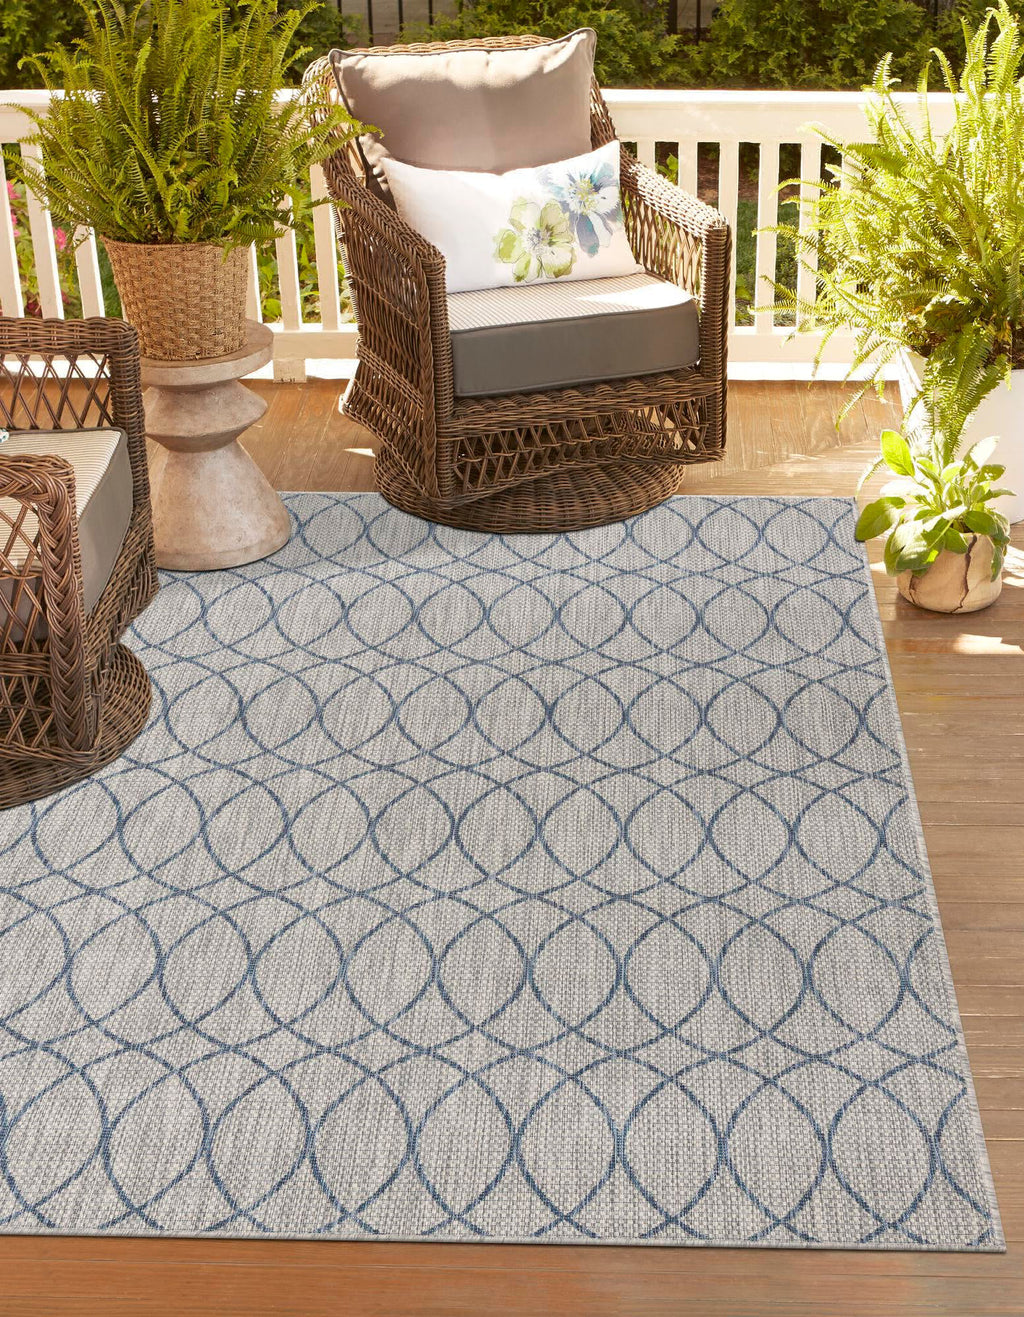 Unique Loom Outdoor Trellis T-KZOD24 Gray Blue Area Rug Rectangle Lifestyle Image Feature